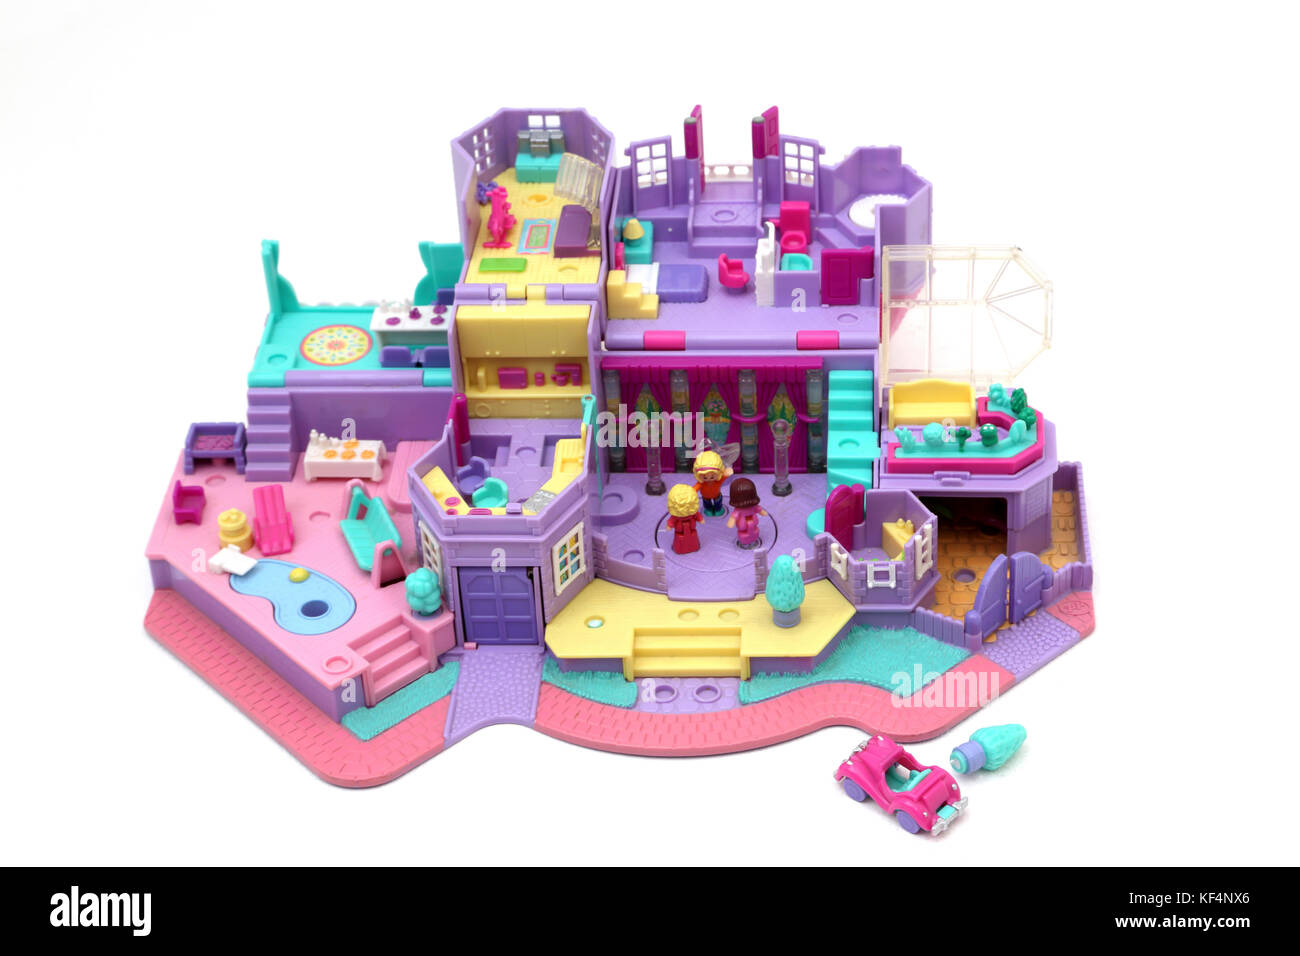 Vintage 1990's Toy Polly Pocket Light-Up Magical Mansion and Car Stock Photo